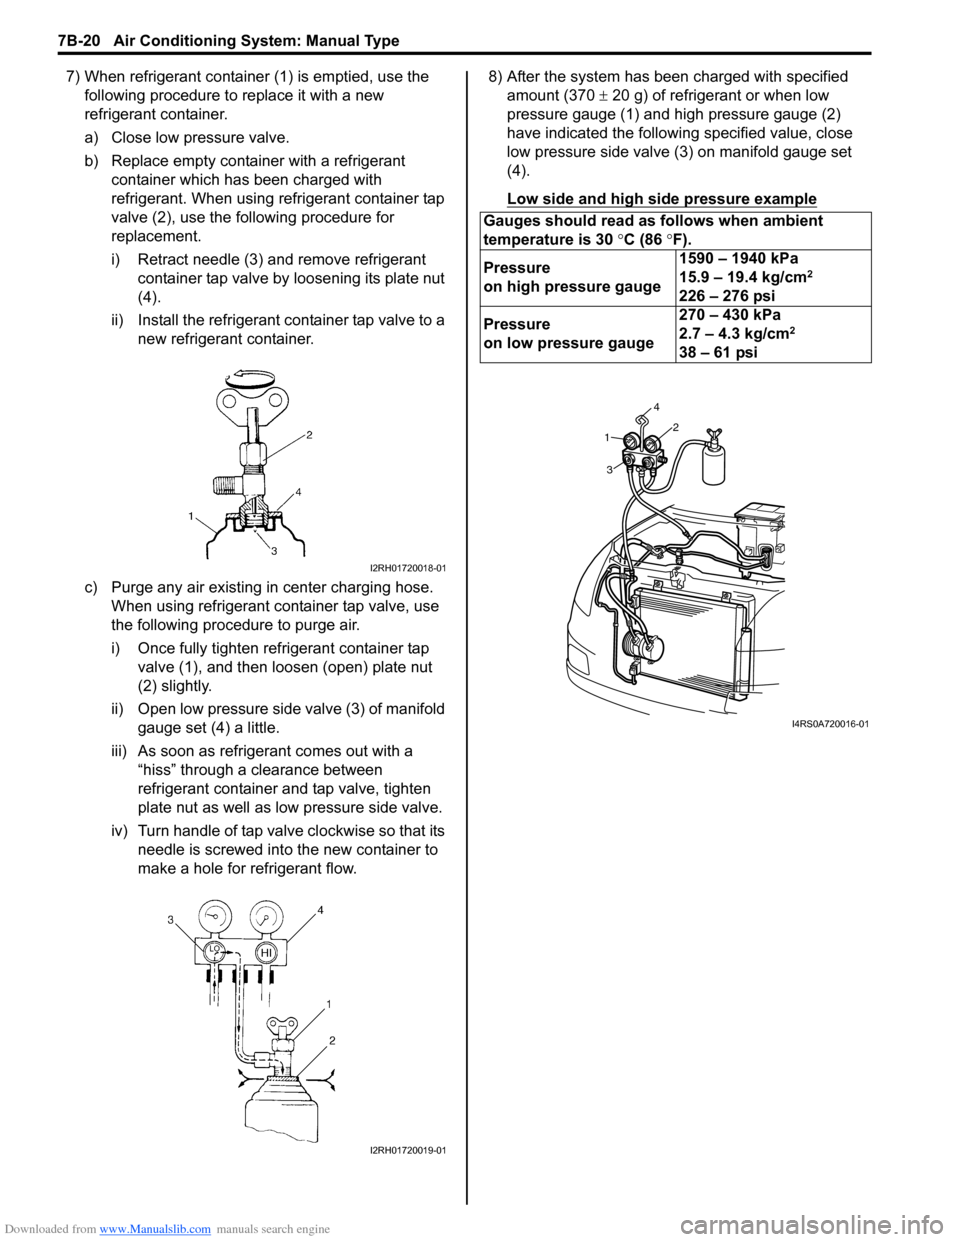 SUZUKI SWIFT 2008 2.G Service Workshop Manual Downloaded from www.Manualslib.com manuals search engine 7B-20 Air Conditioning System: Manual Type
7) When refrigerant container (1) is emptied, use the following procedure to replace it with a new 
